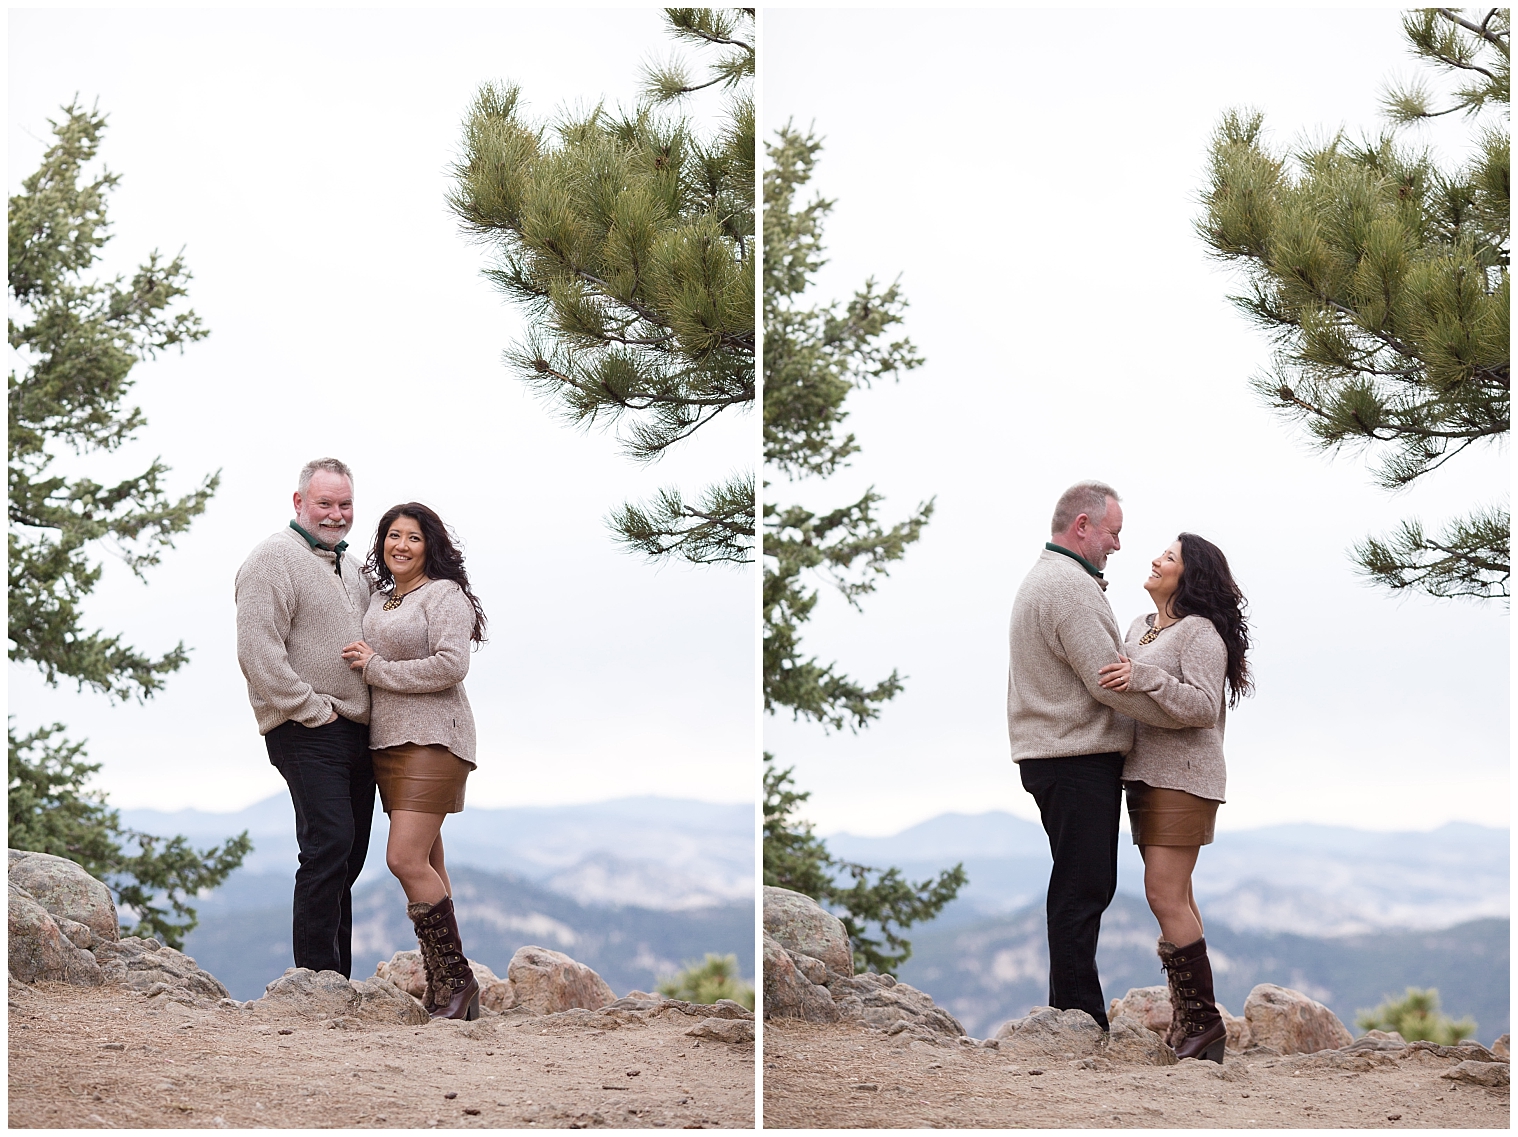 Engaged couple holds each other during their session with a Breckenridge engagement photographer.